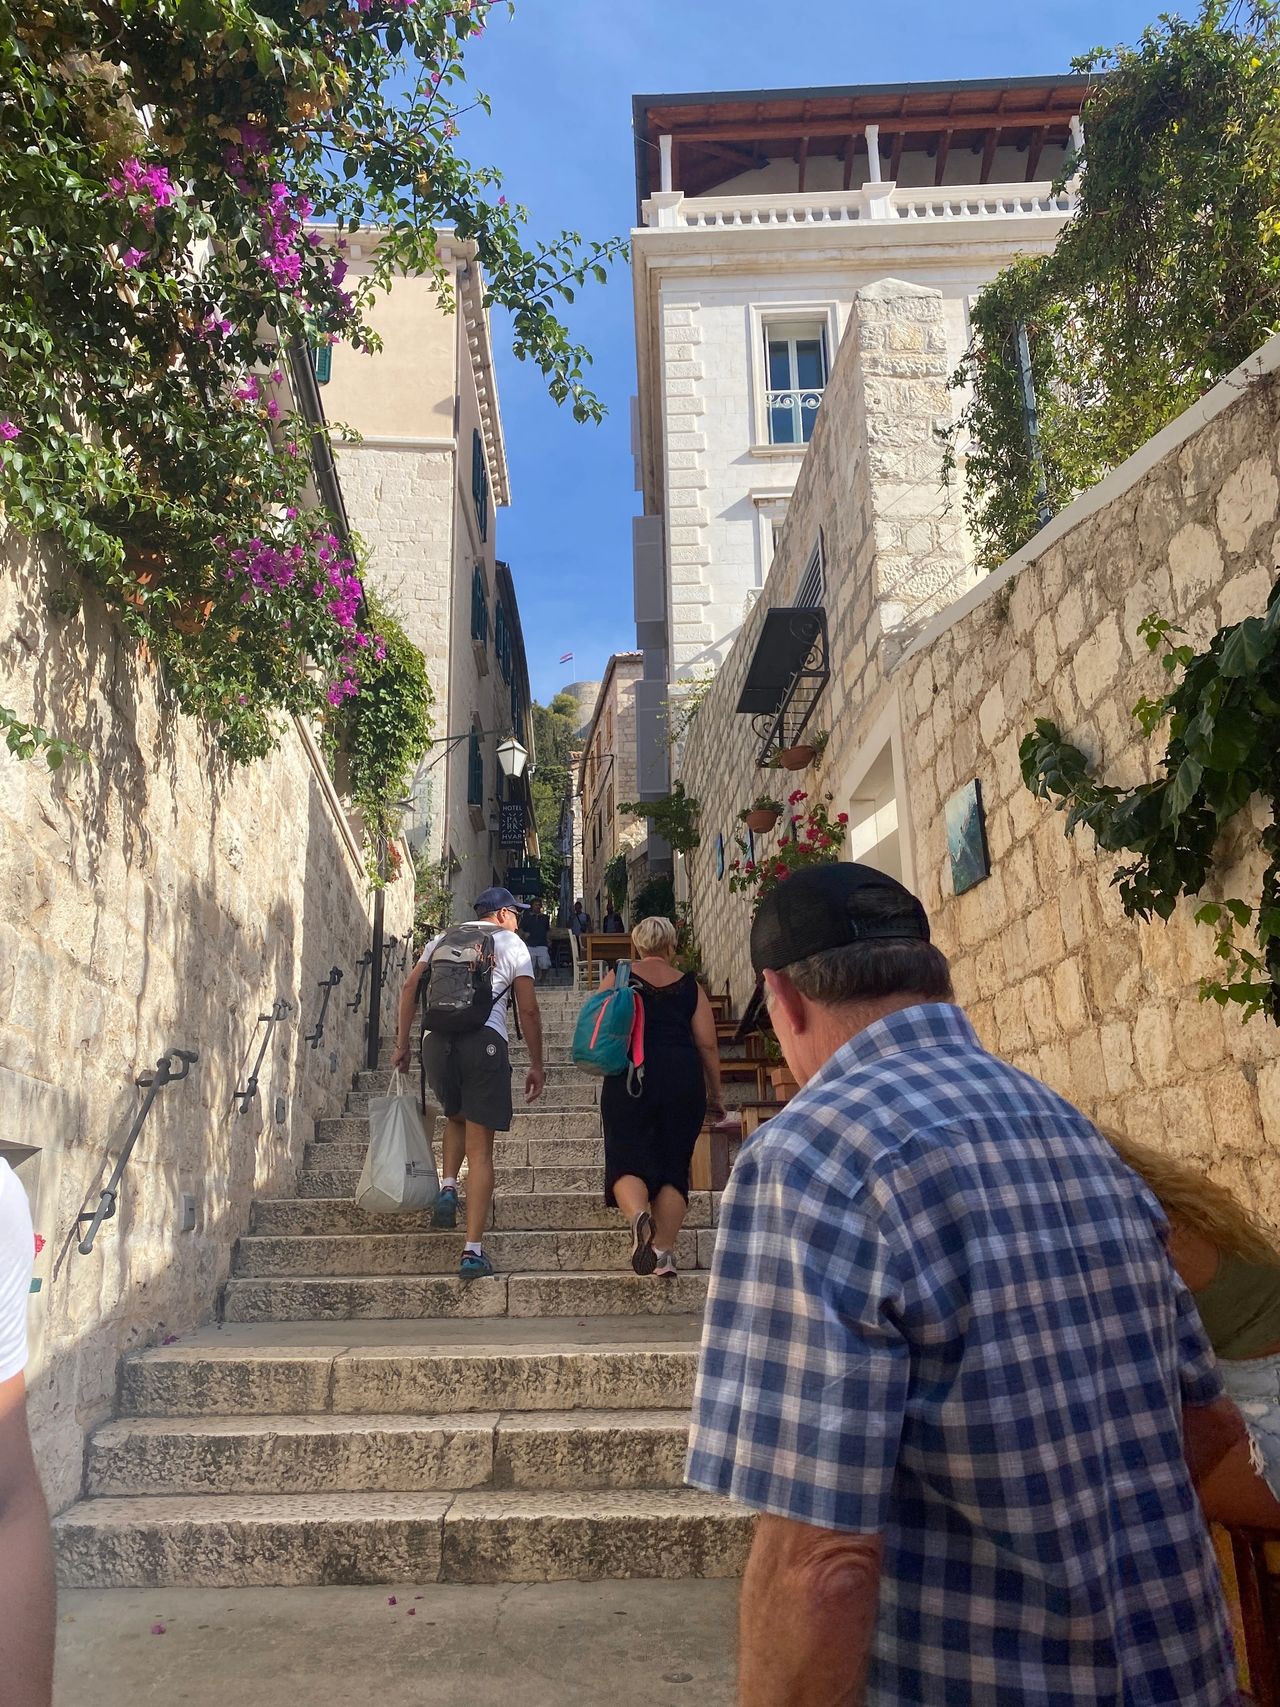 Hvar is definitely a city of stairs!